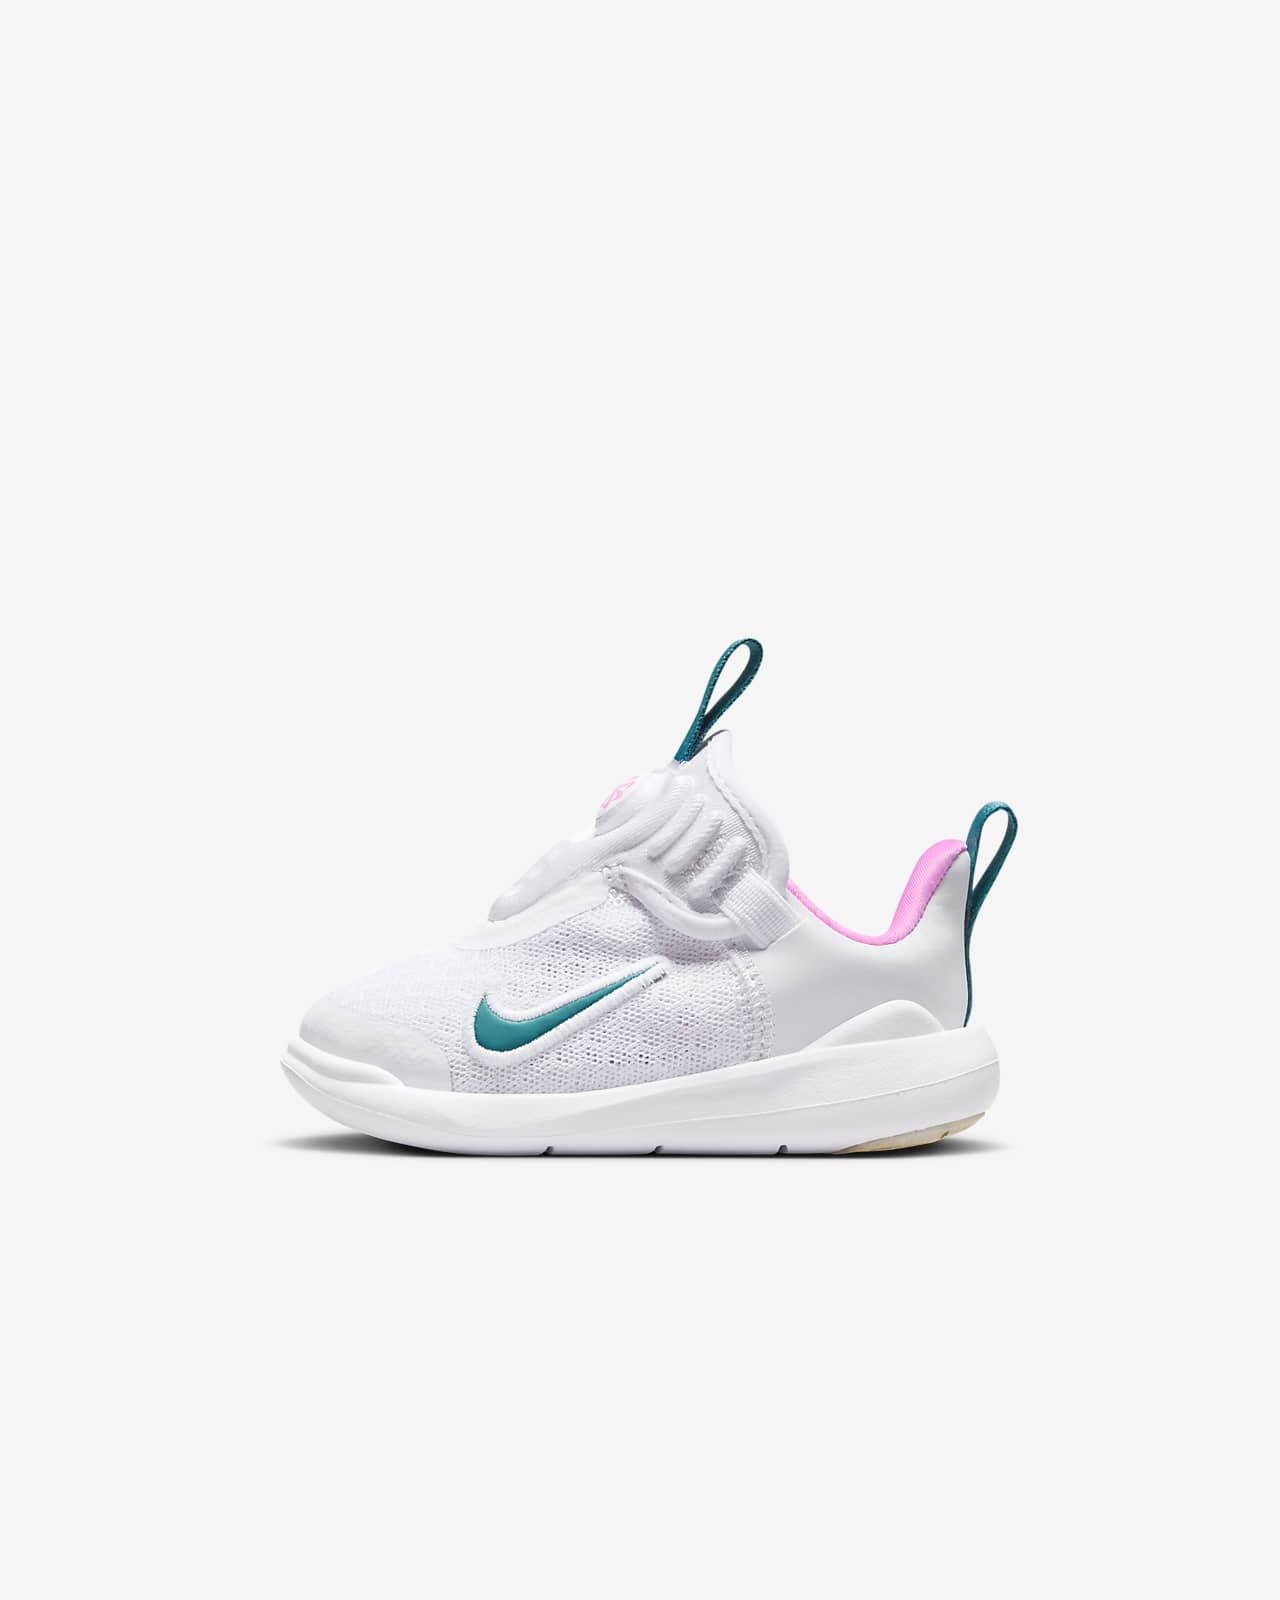 Nike E-Series 1.0 Baby/Toddler Shoes